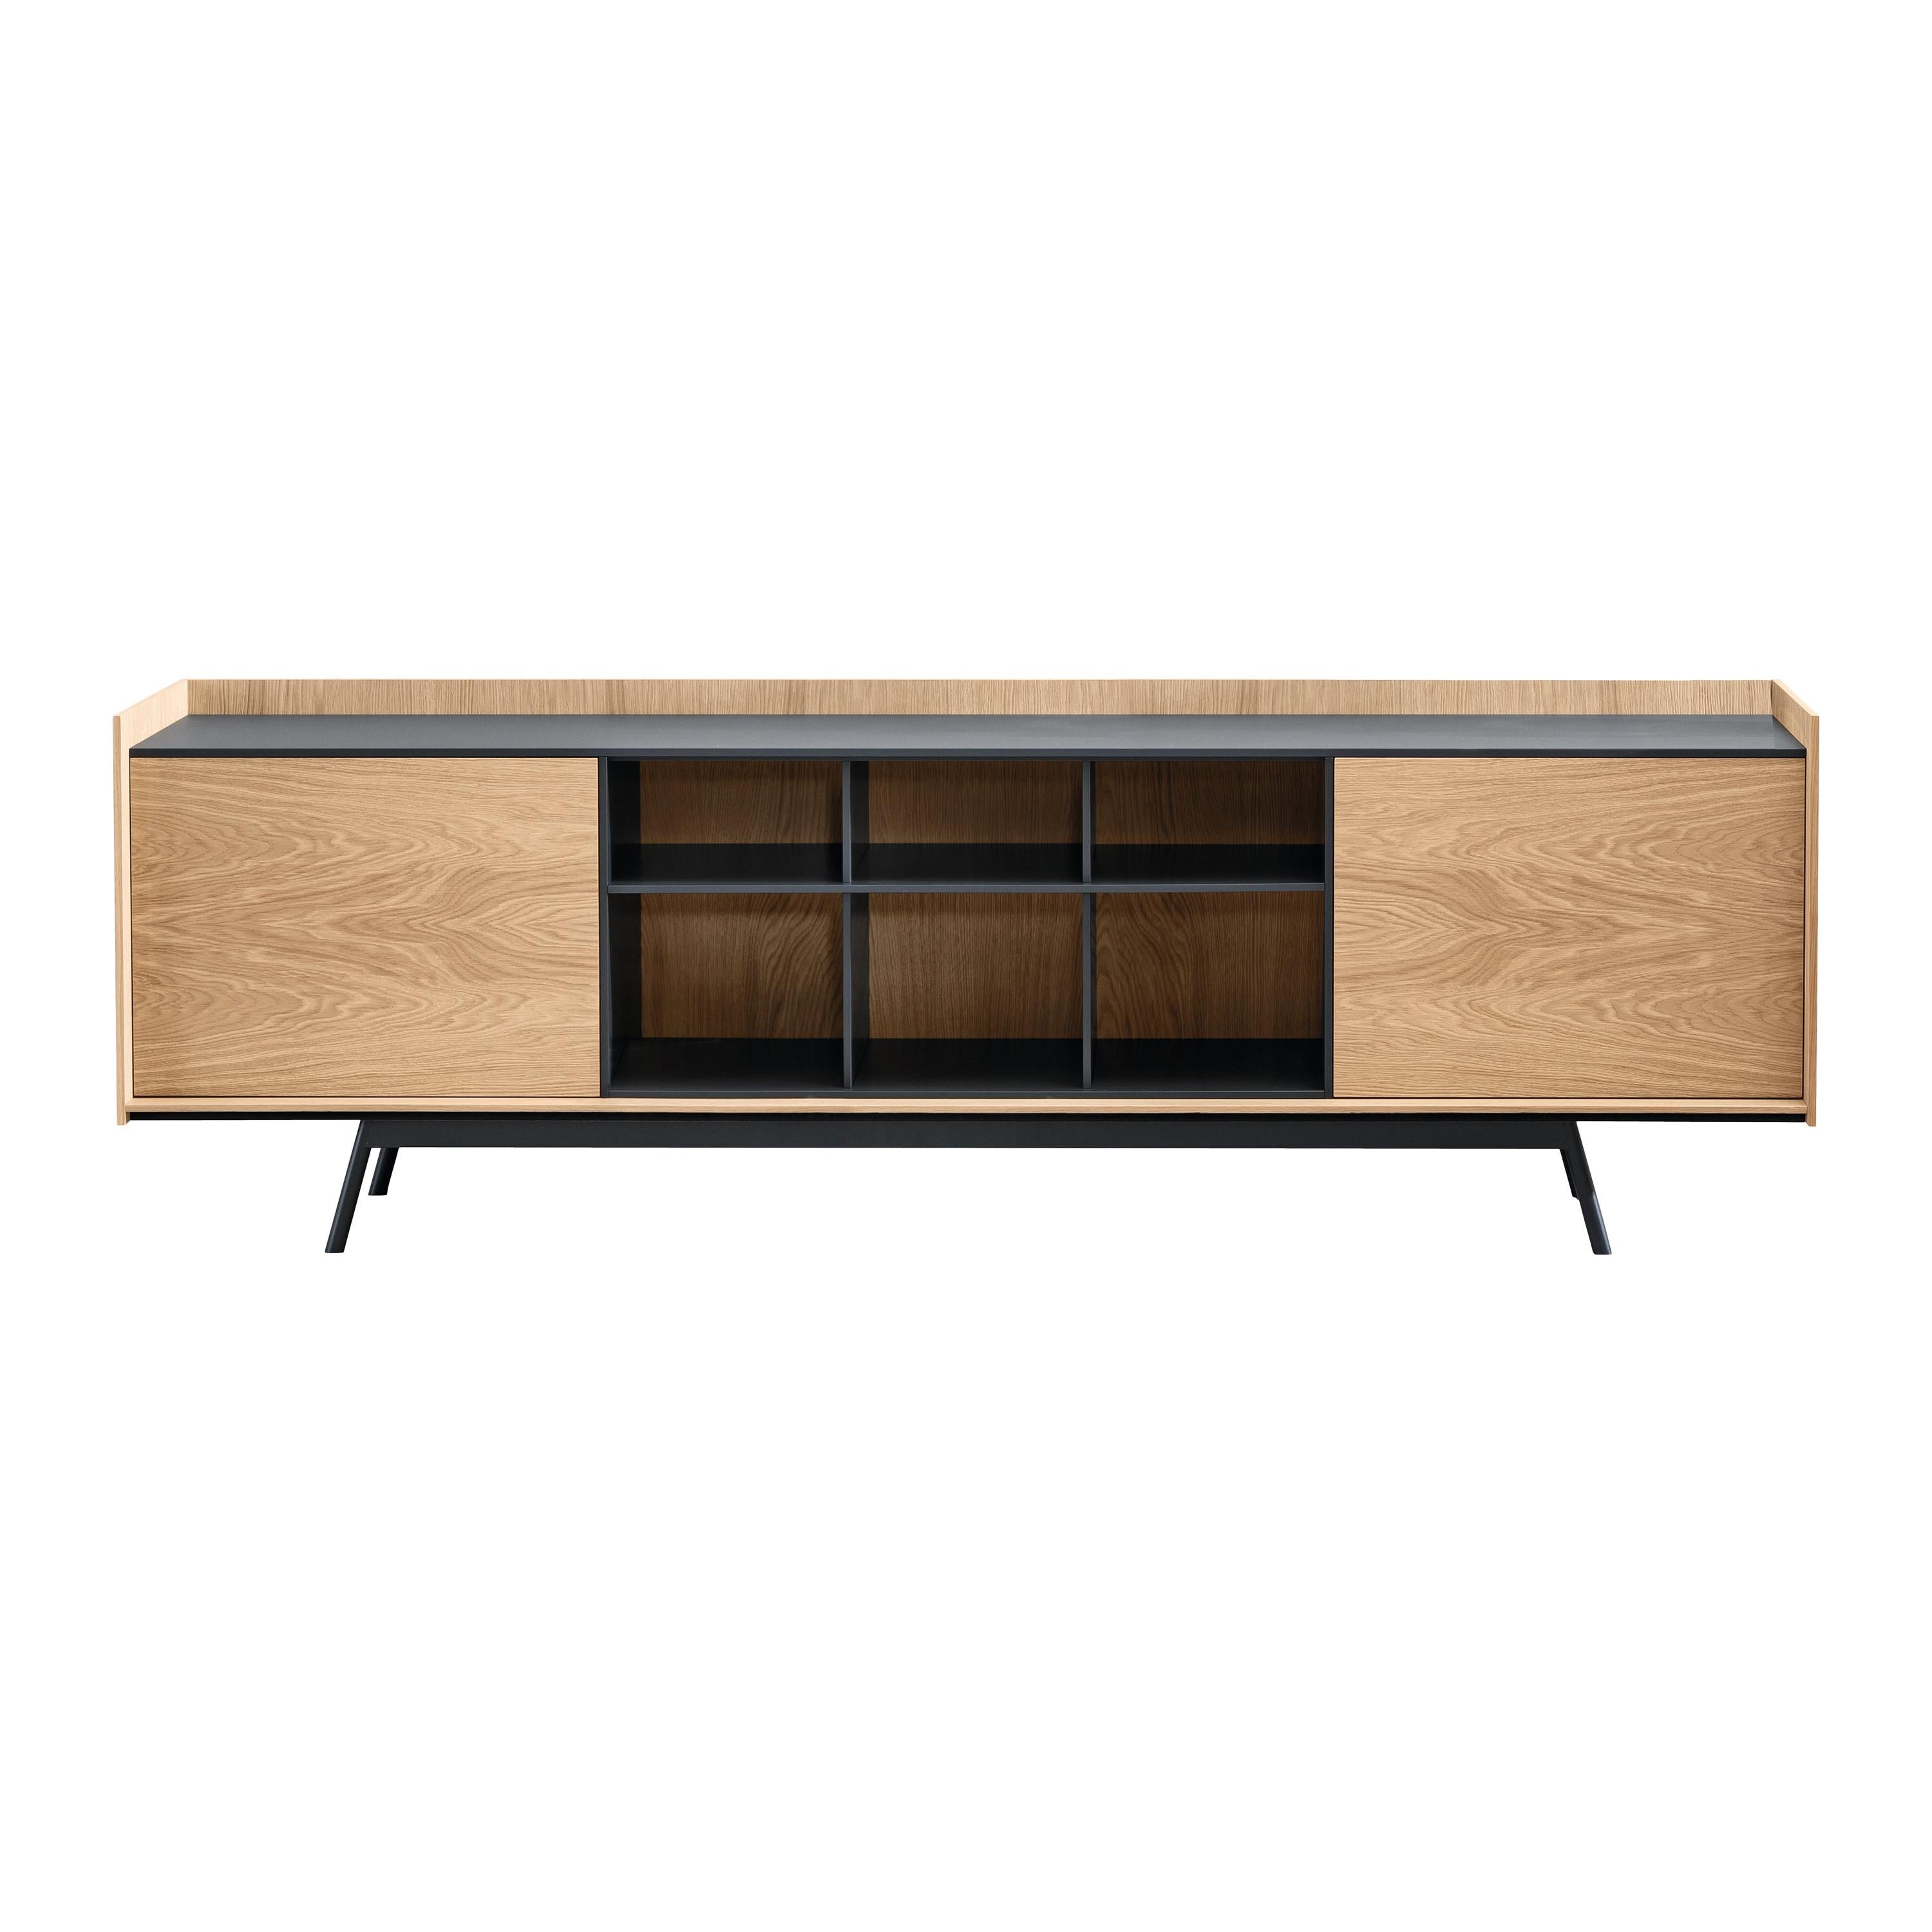 Edge Large Sideboard in Walnut Frame, Matching Lacquer Storage & Base, by E-GGS